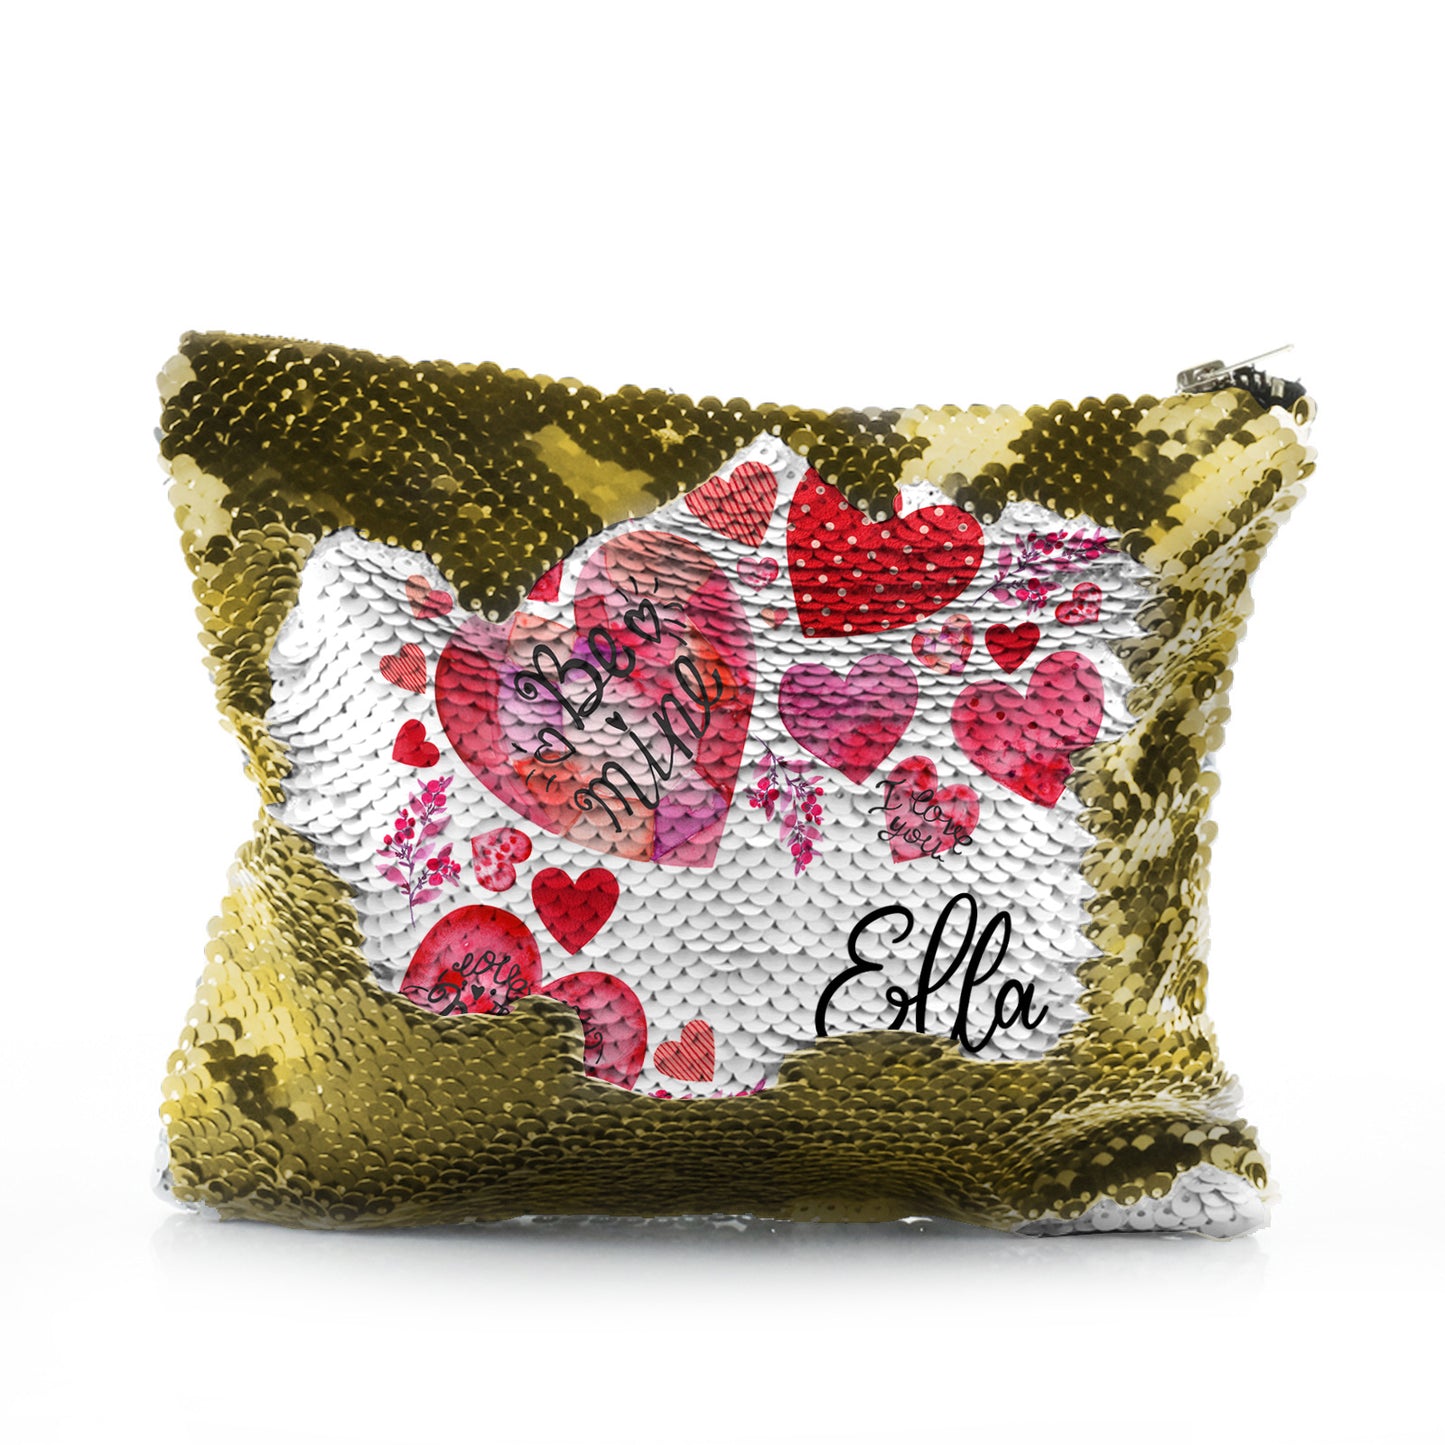 Personalised Sequin Zip Bag with Stylish Text and Material Hearts Love Message Print